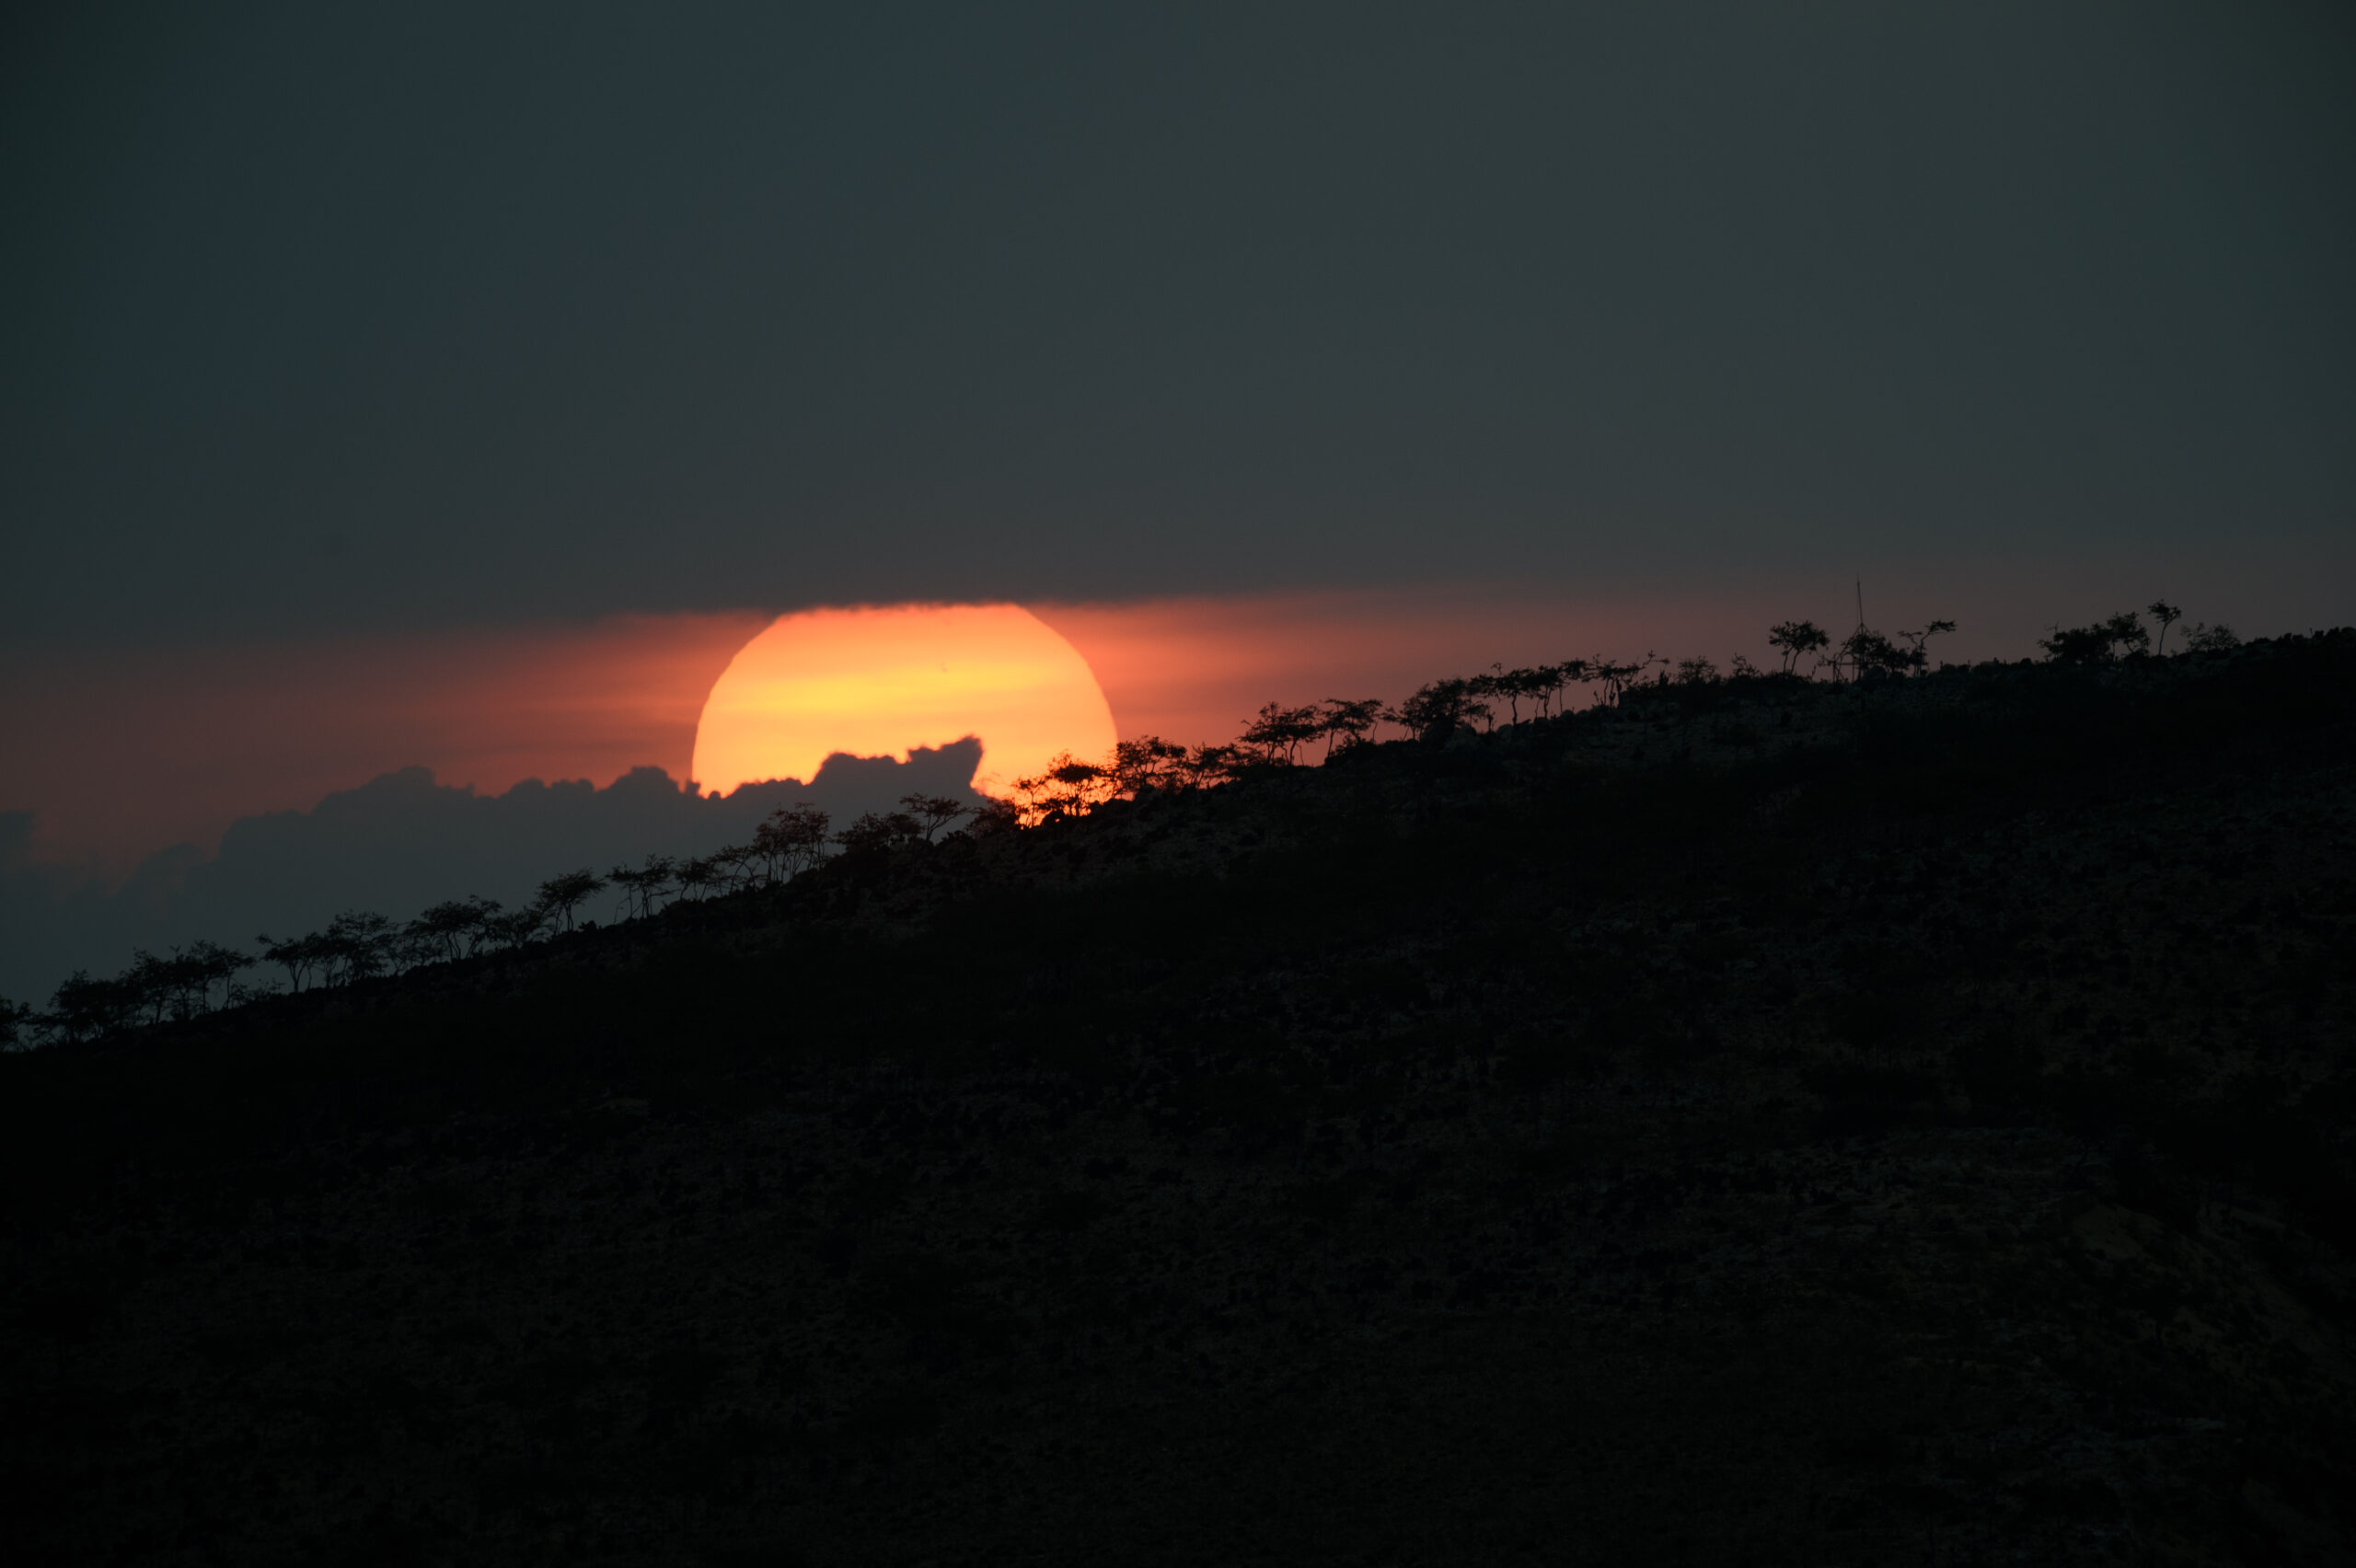 Socotra sunset silhouettes